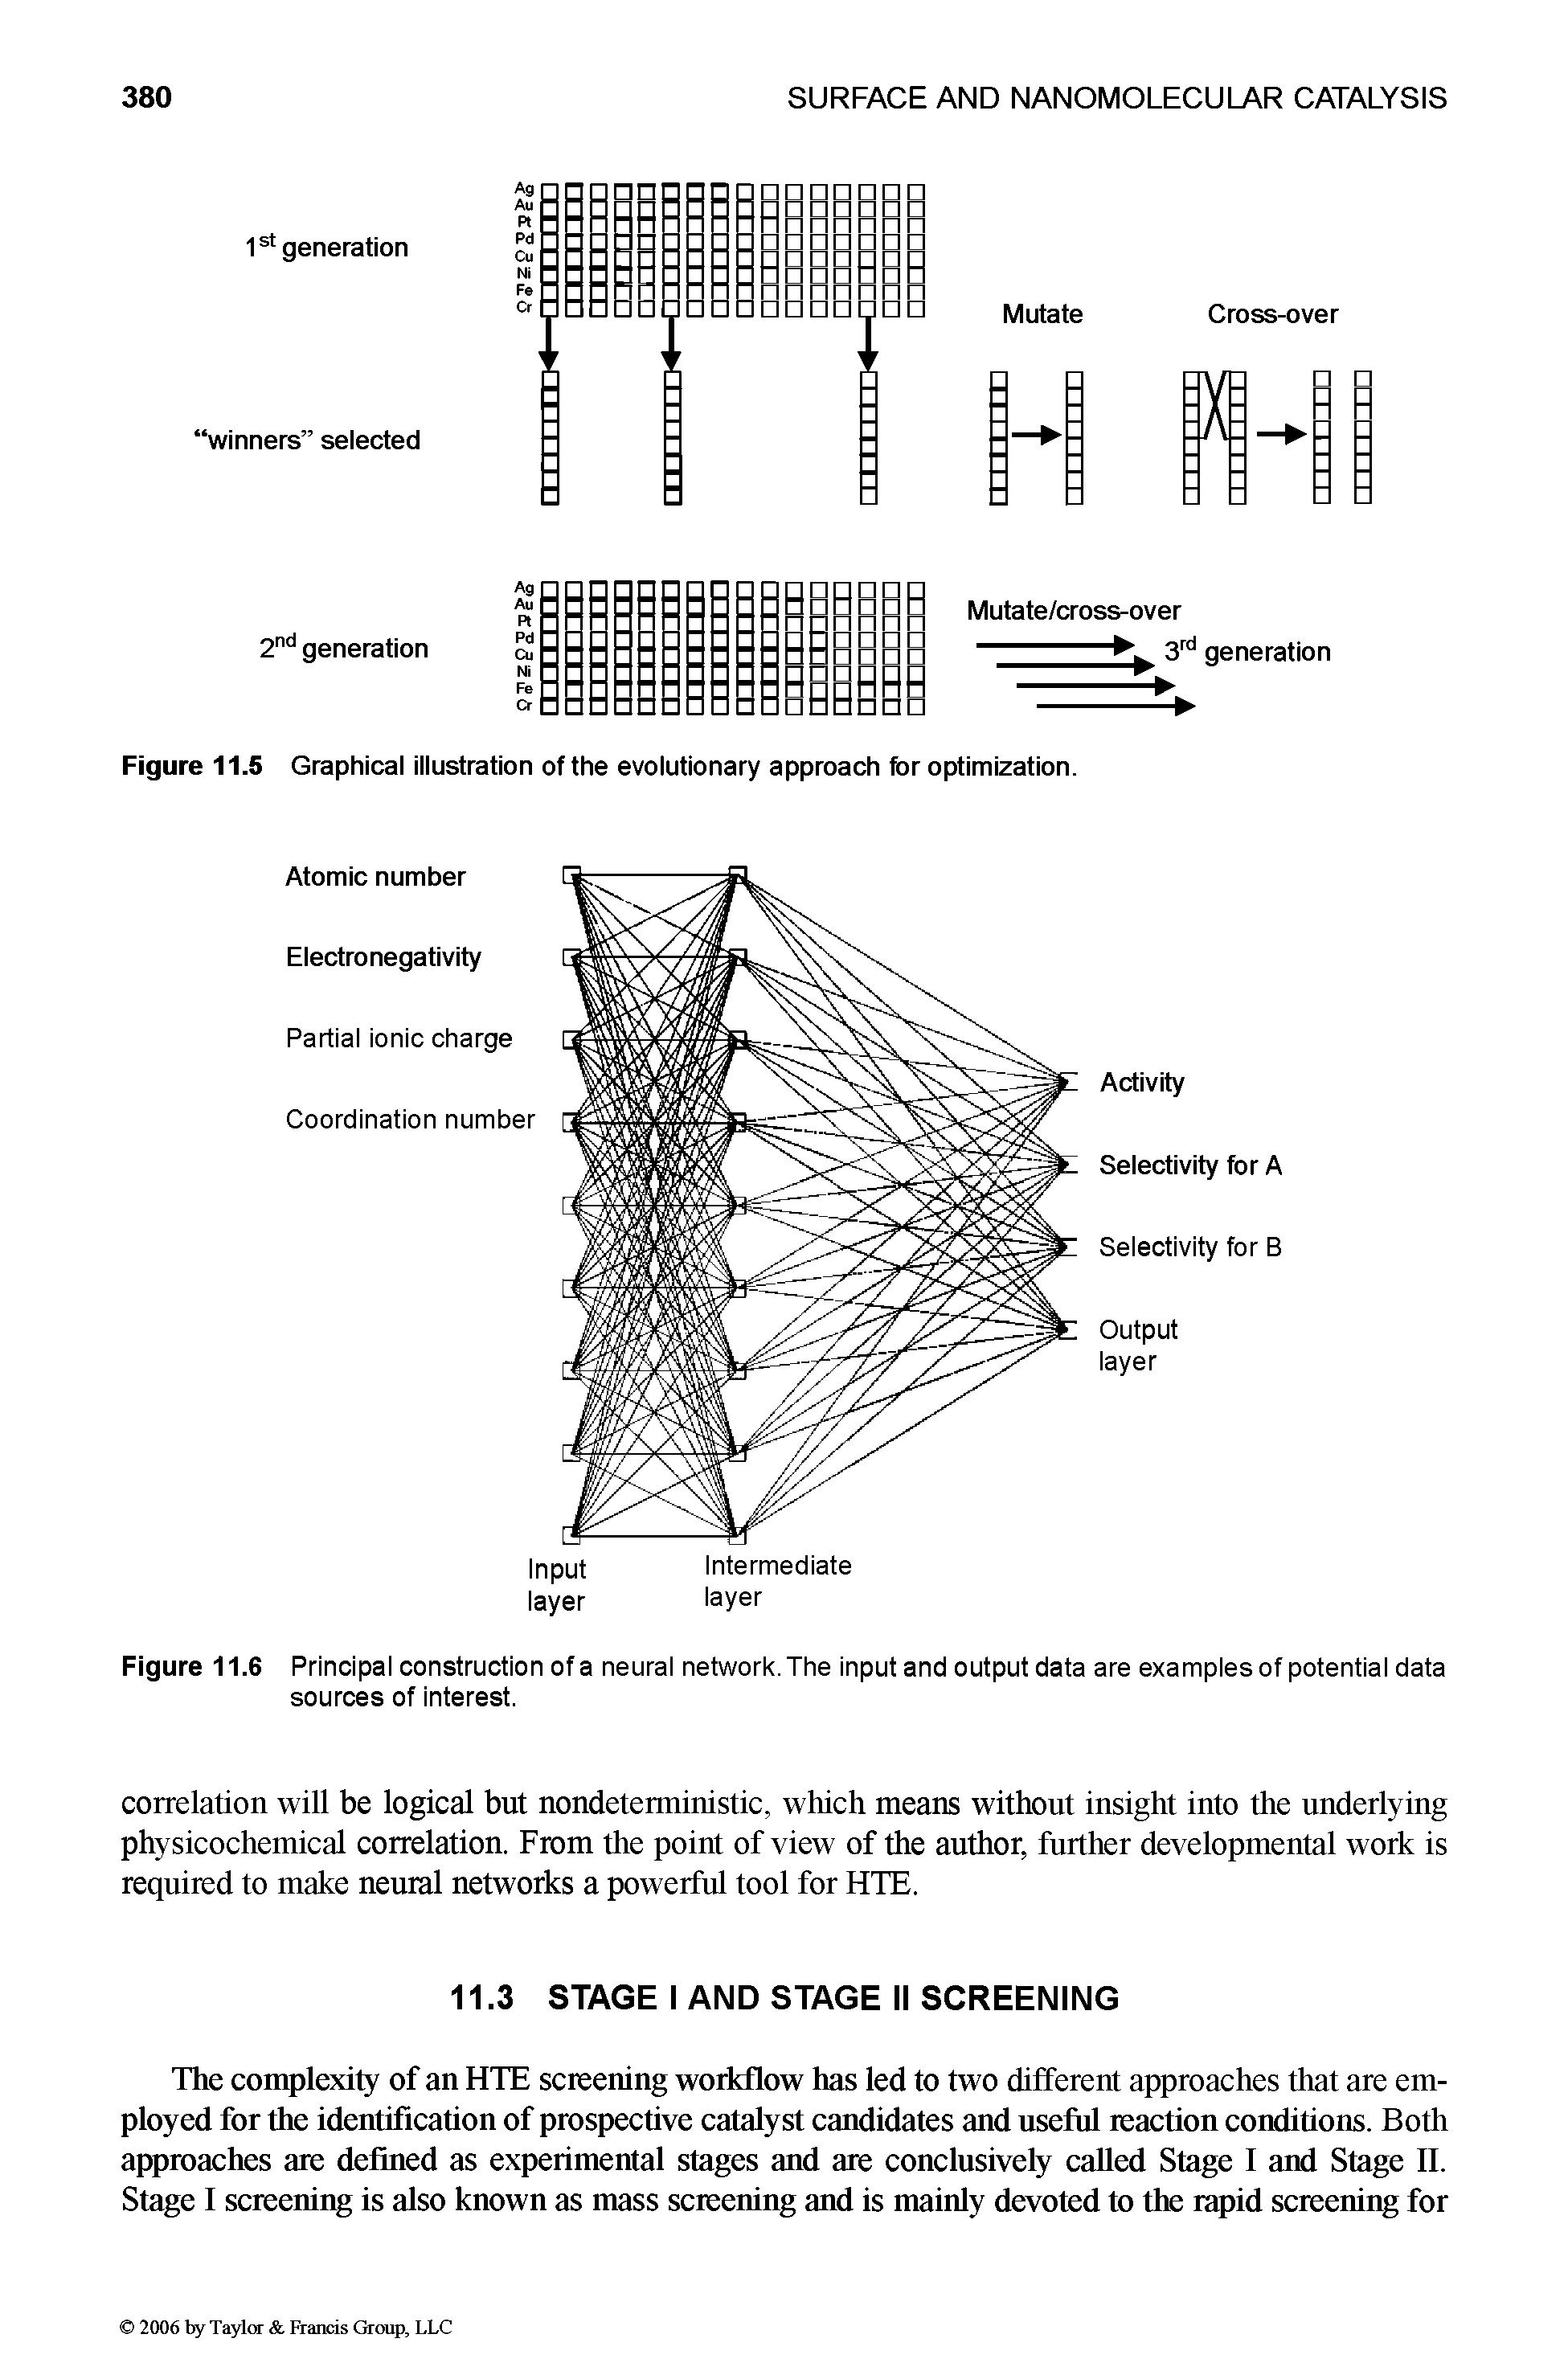 Figure 11.6 Principal construction of a neural network. The input and output data are examples of potential data sources of interest.